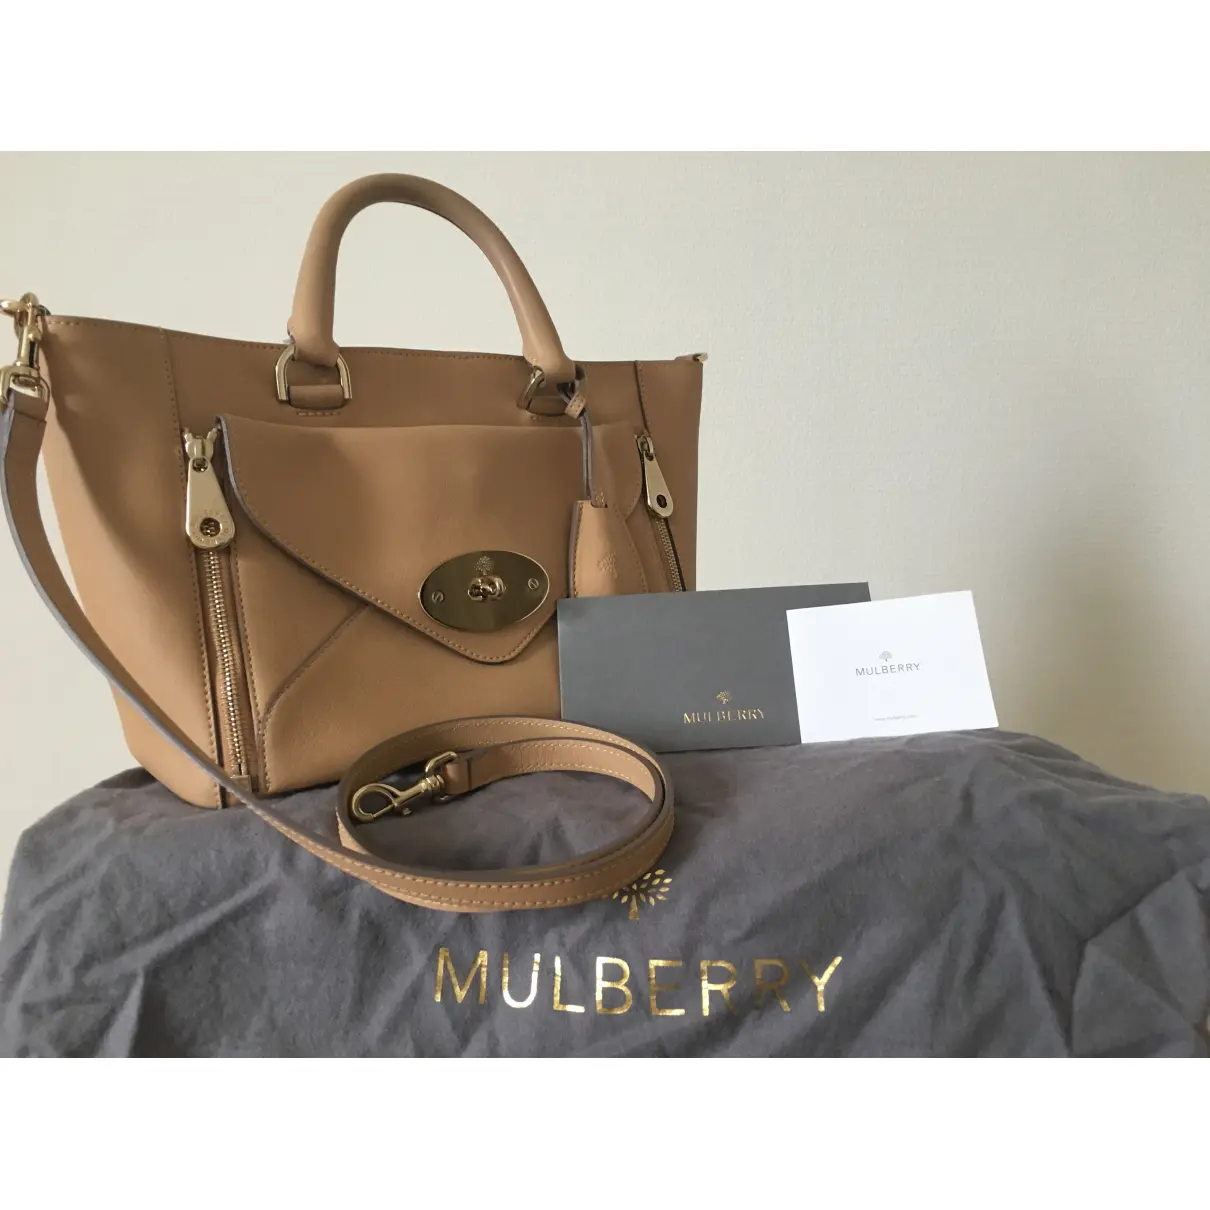 Willow leather handbag Mulberry